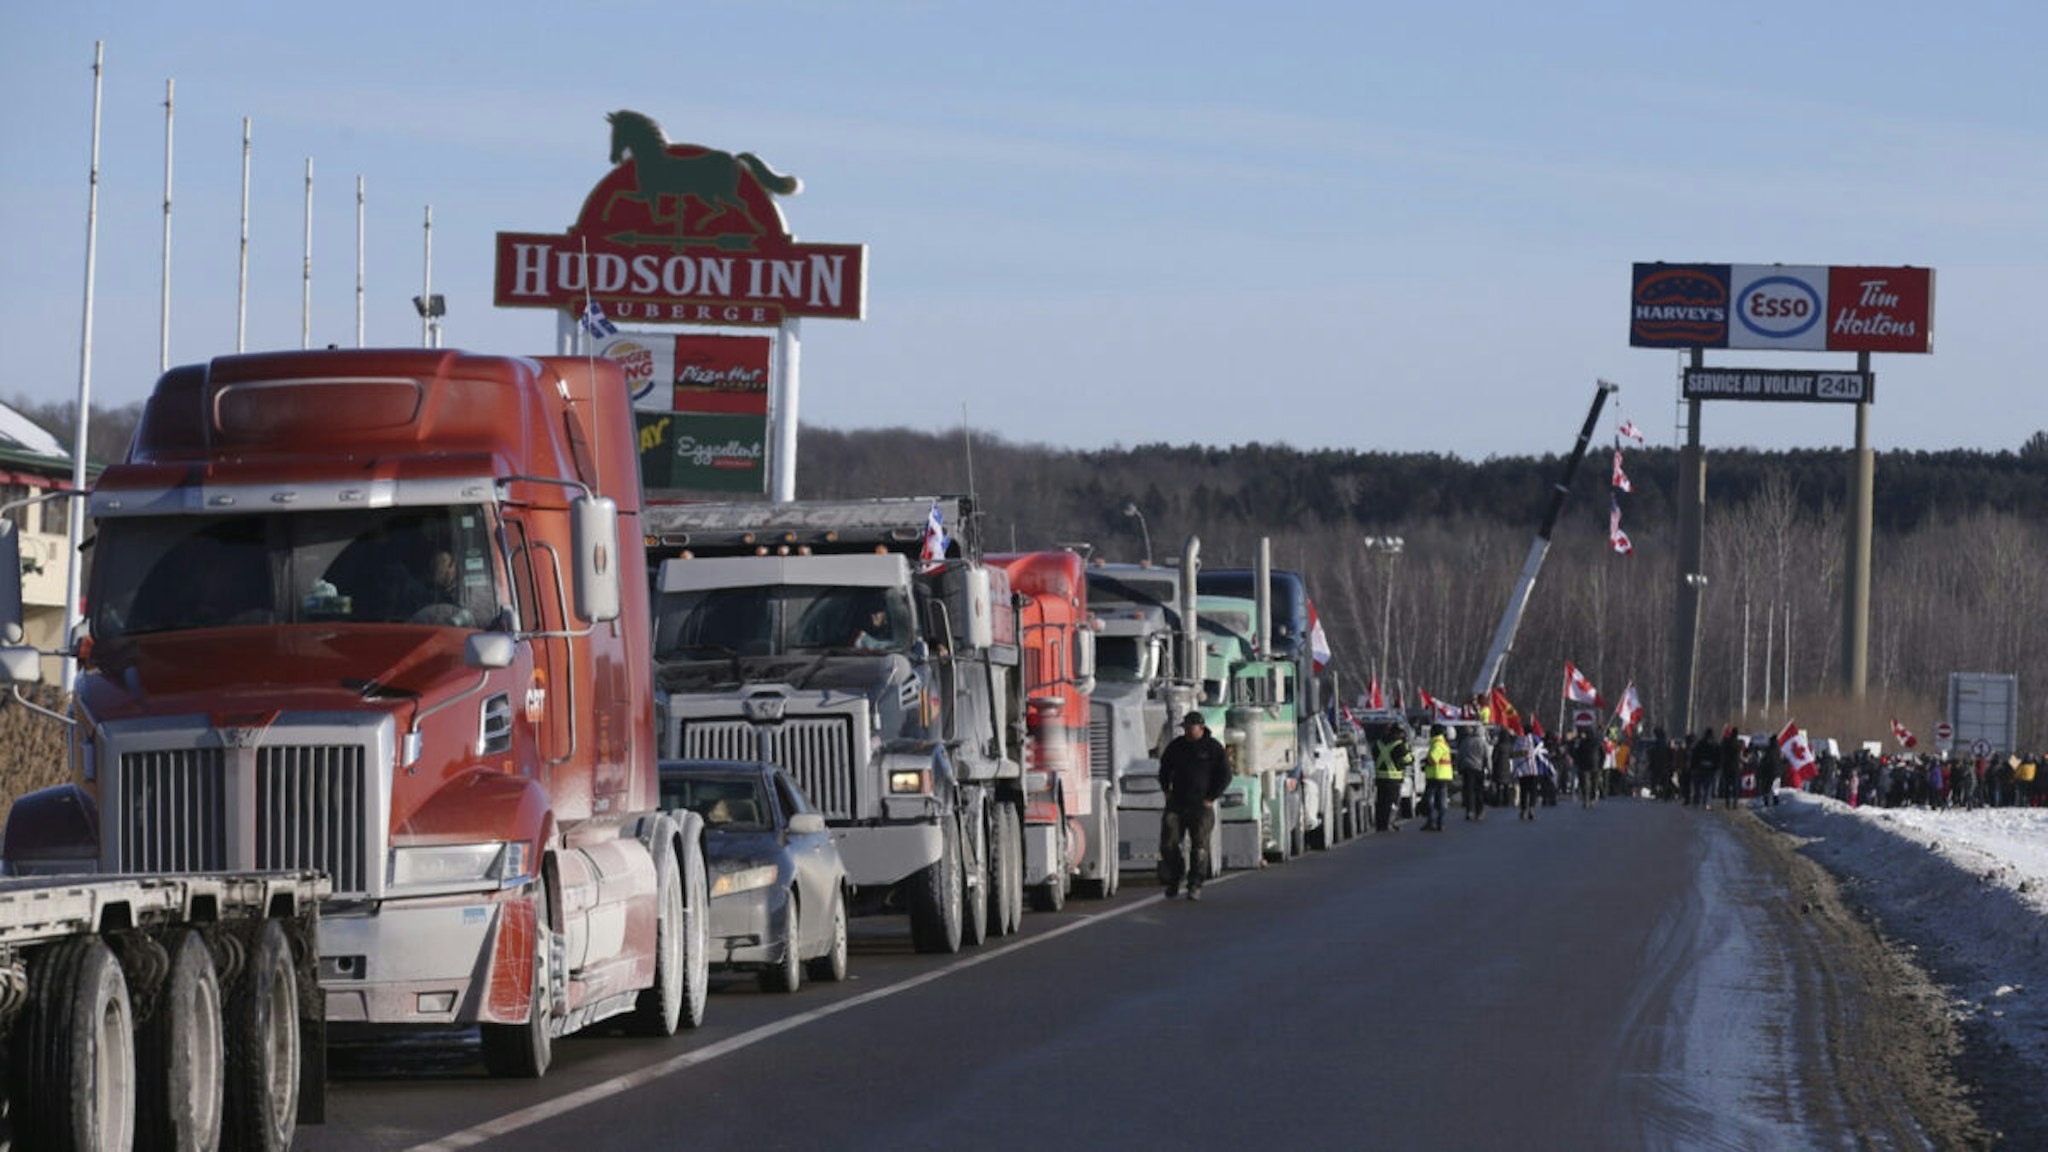 A convoy of trucks lines up on an on-ramp in Rigaud, Quebec, Canada, on Friday, Jan. 28, 2022.